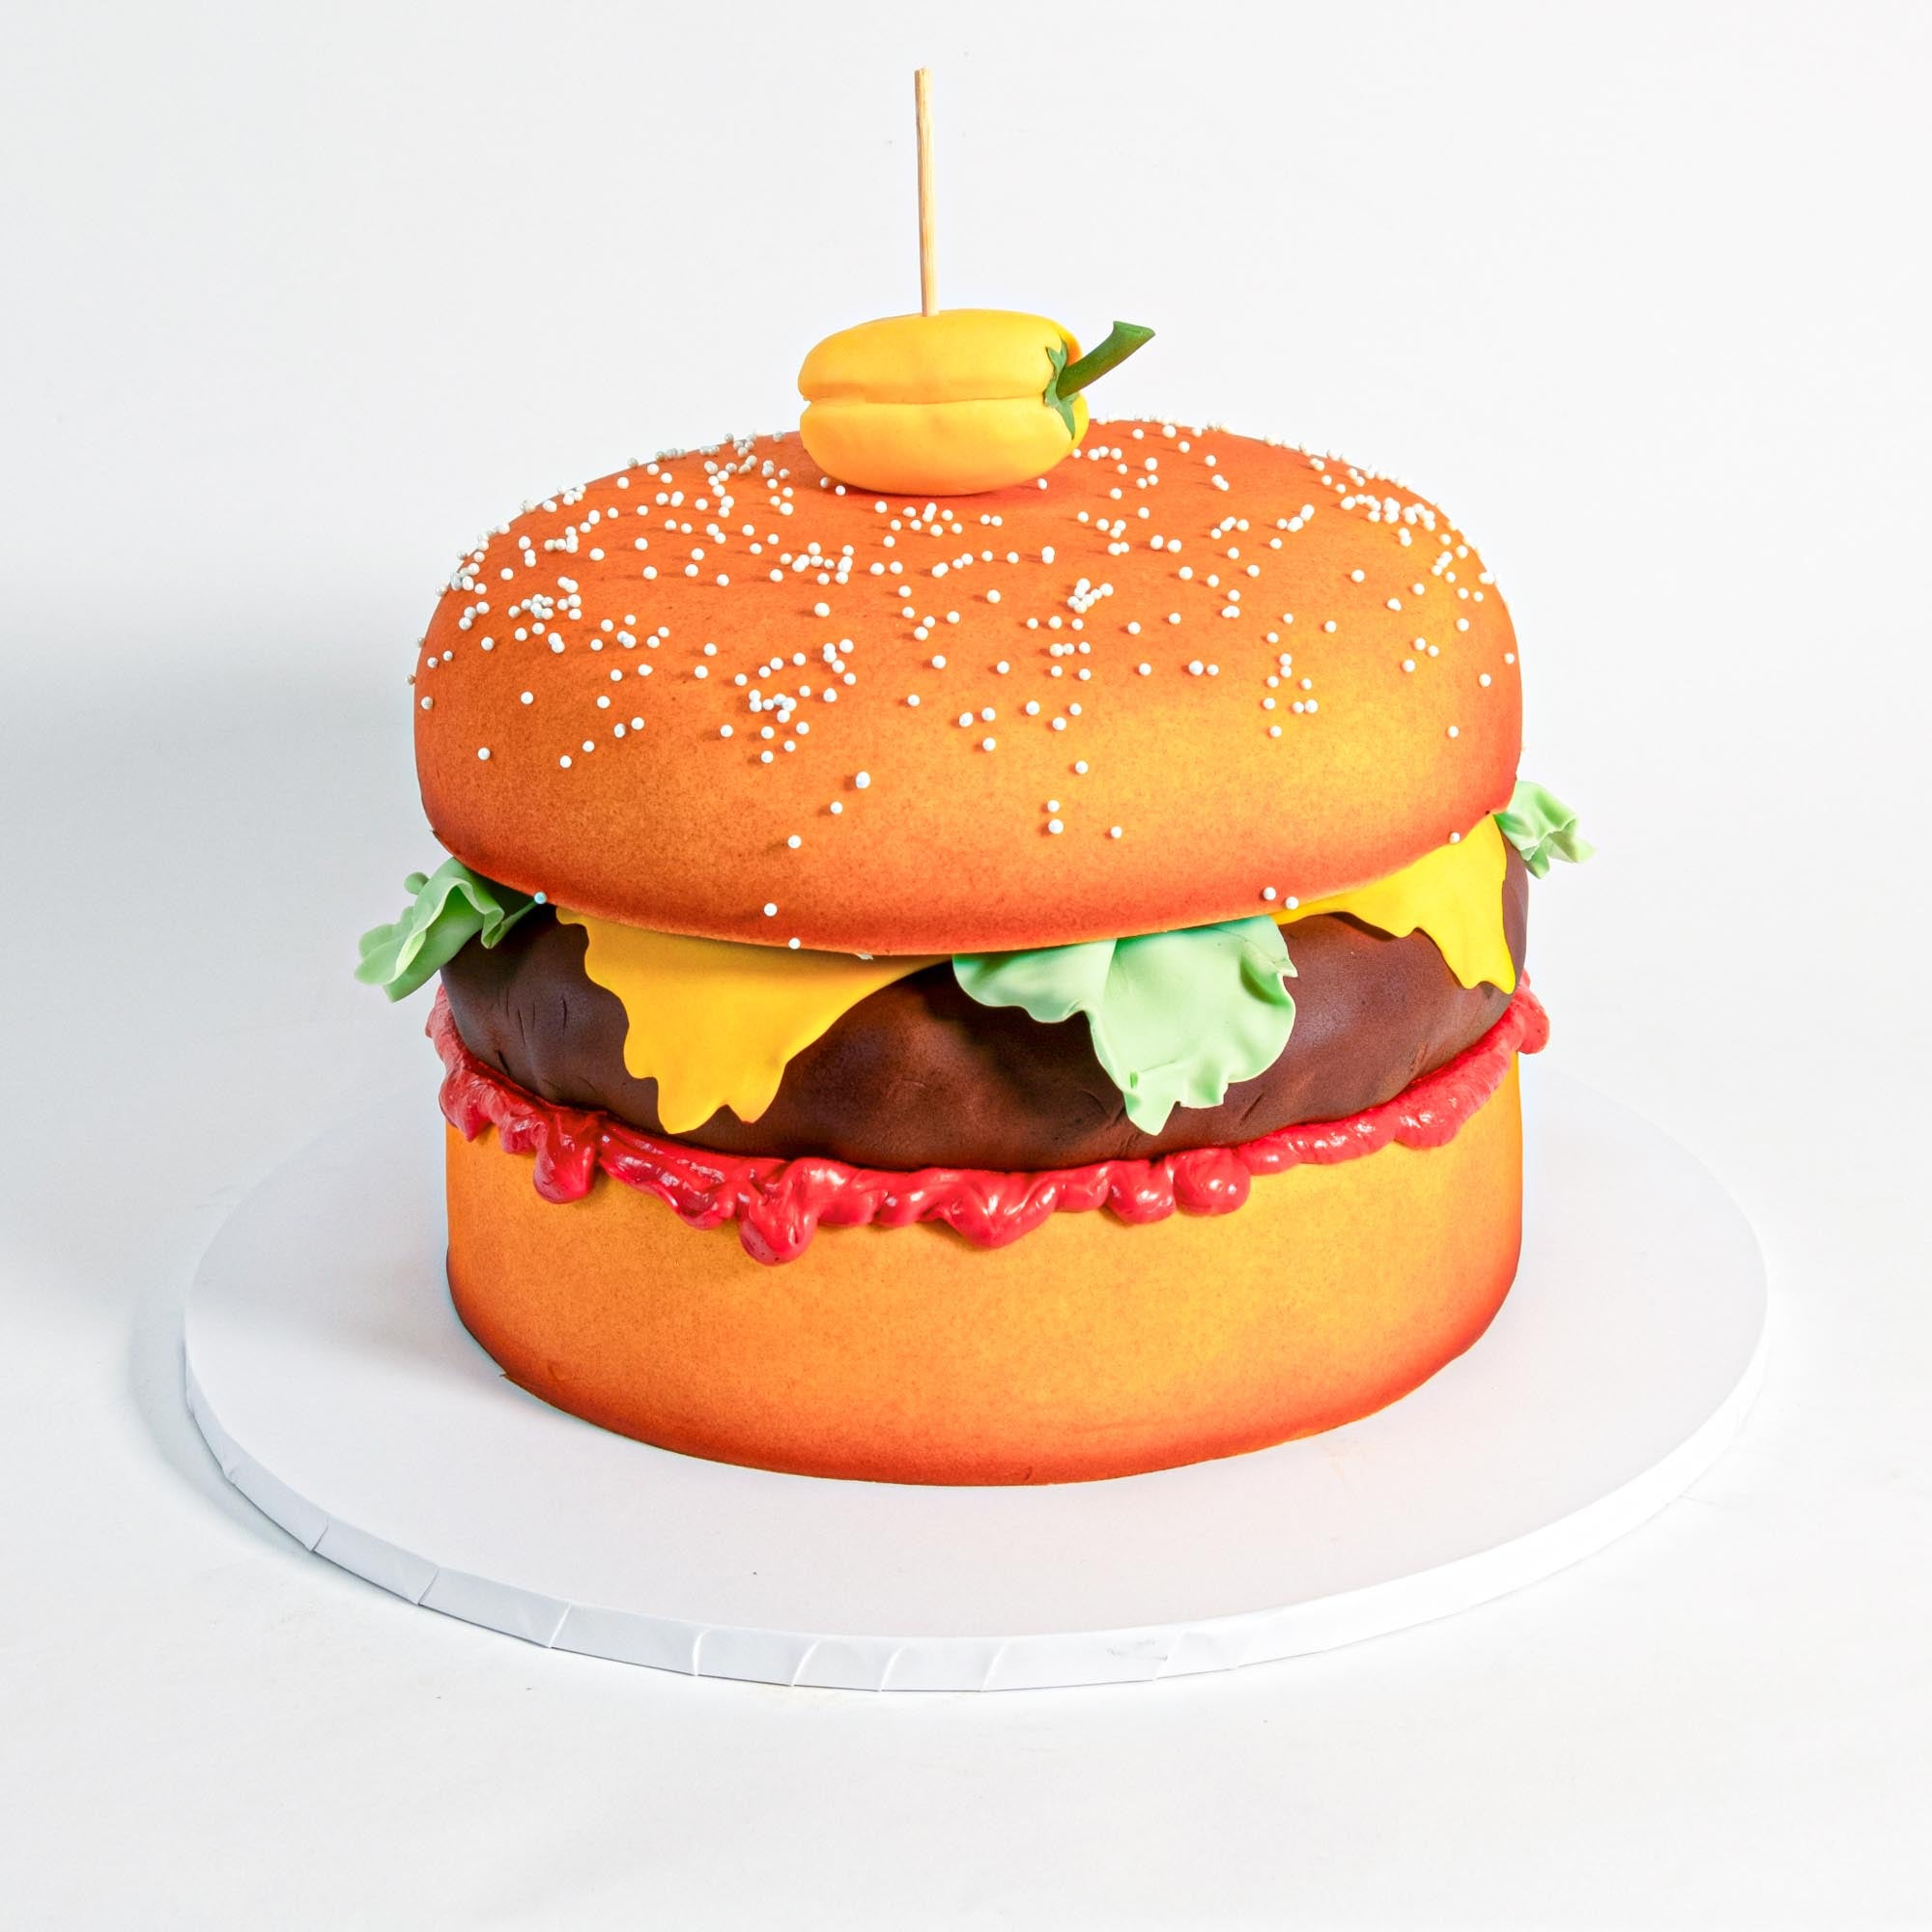 16 Crazy Realistic Cakes That'll Make You Do a Double Take | Hamburger cake,  Realistic cakes, Burger cake